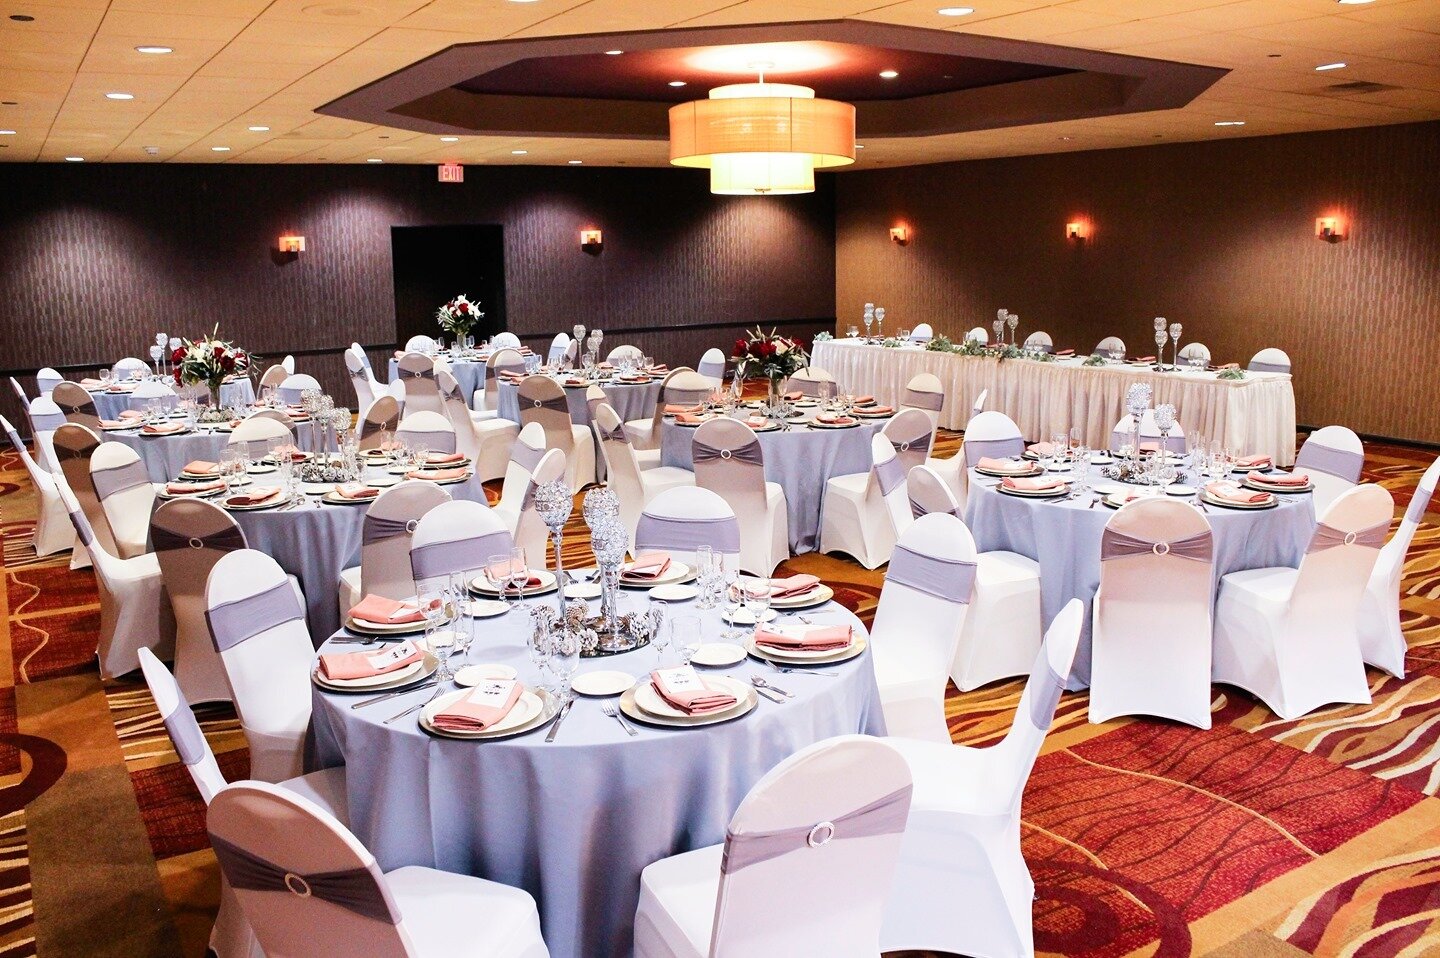 Still considering a small socially distant wedding? Our Crystal Skylight room is the perfect place to hold your wedding!
&bull;
&bull;
&bull;
&bull;
&bull;
&bull;
&bull;
&bull;
#marriedinmke #marriedinmilwaukee #milwaukeeweddingvenues #mke #milwaukee